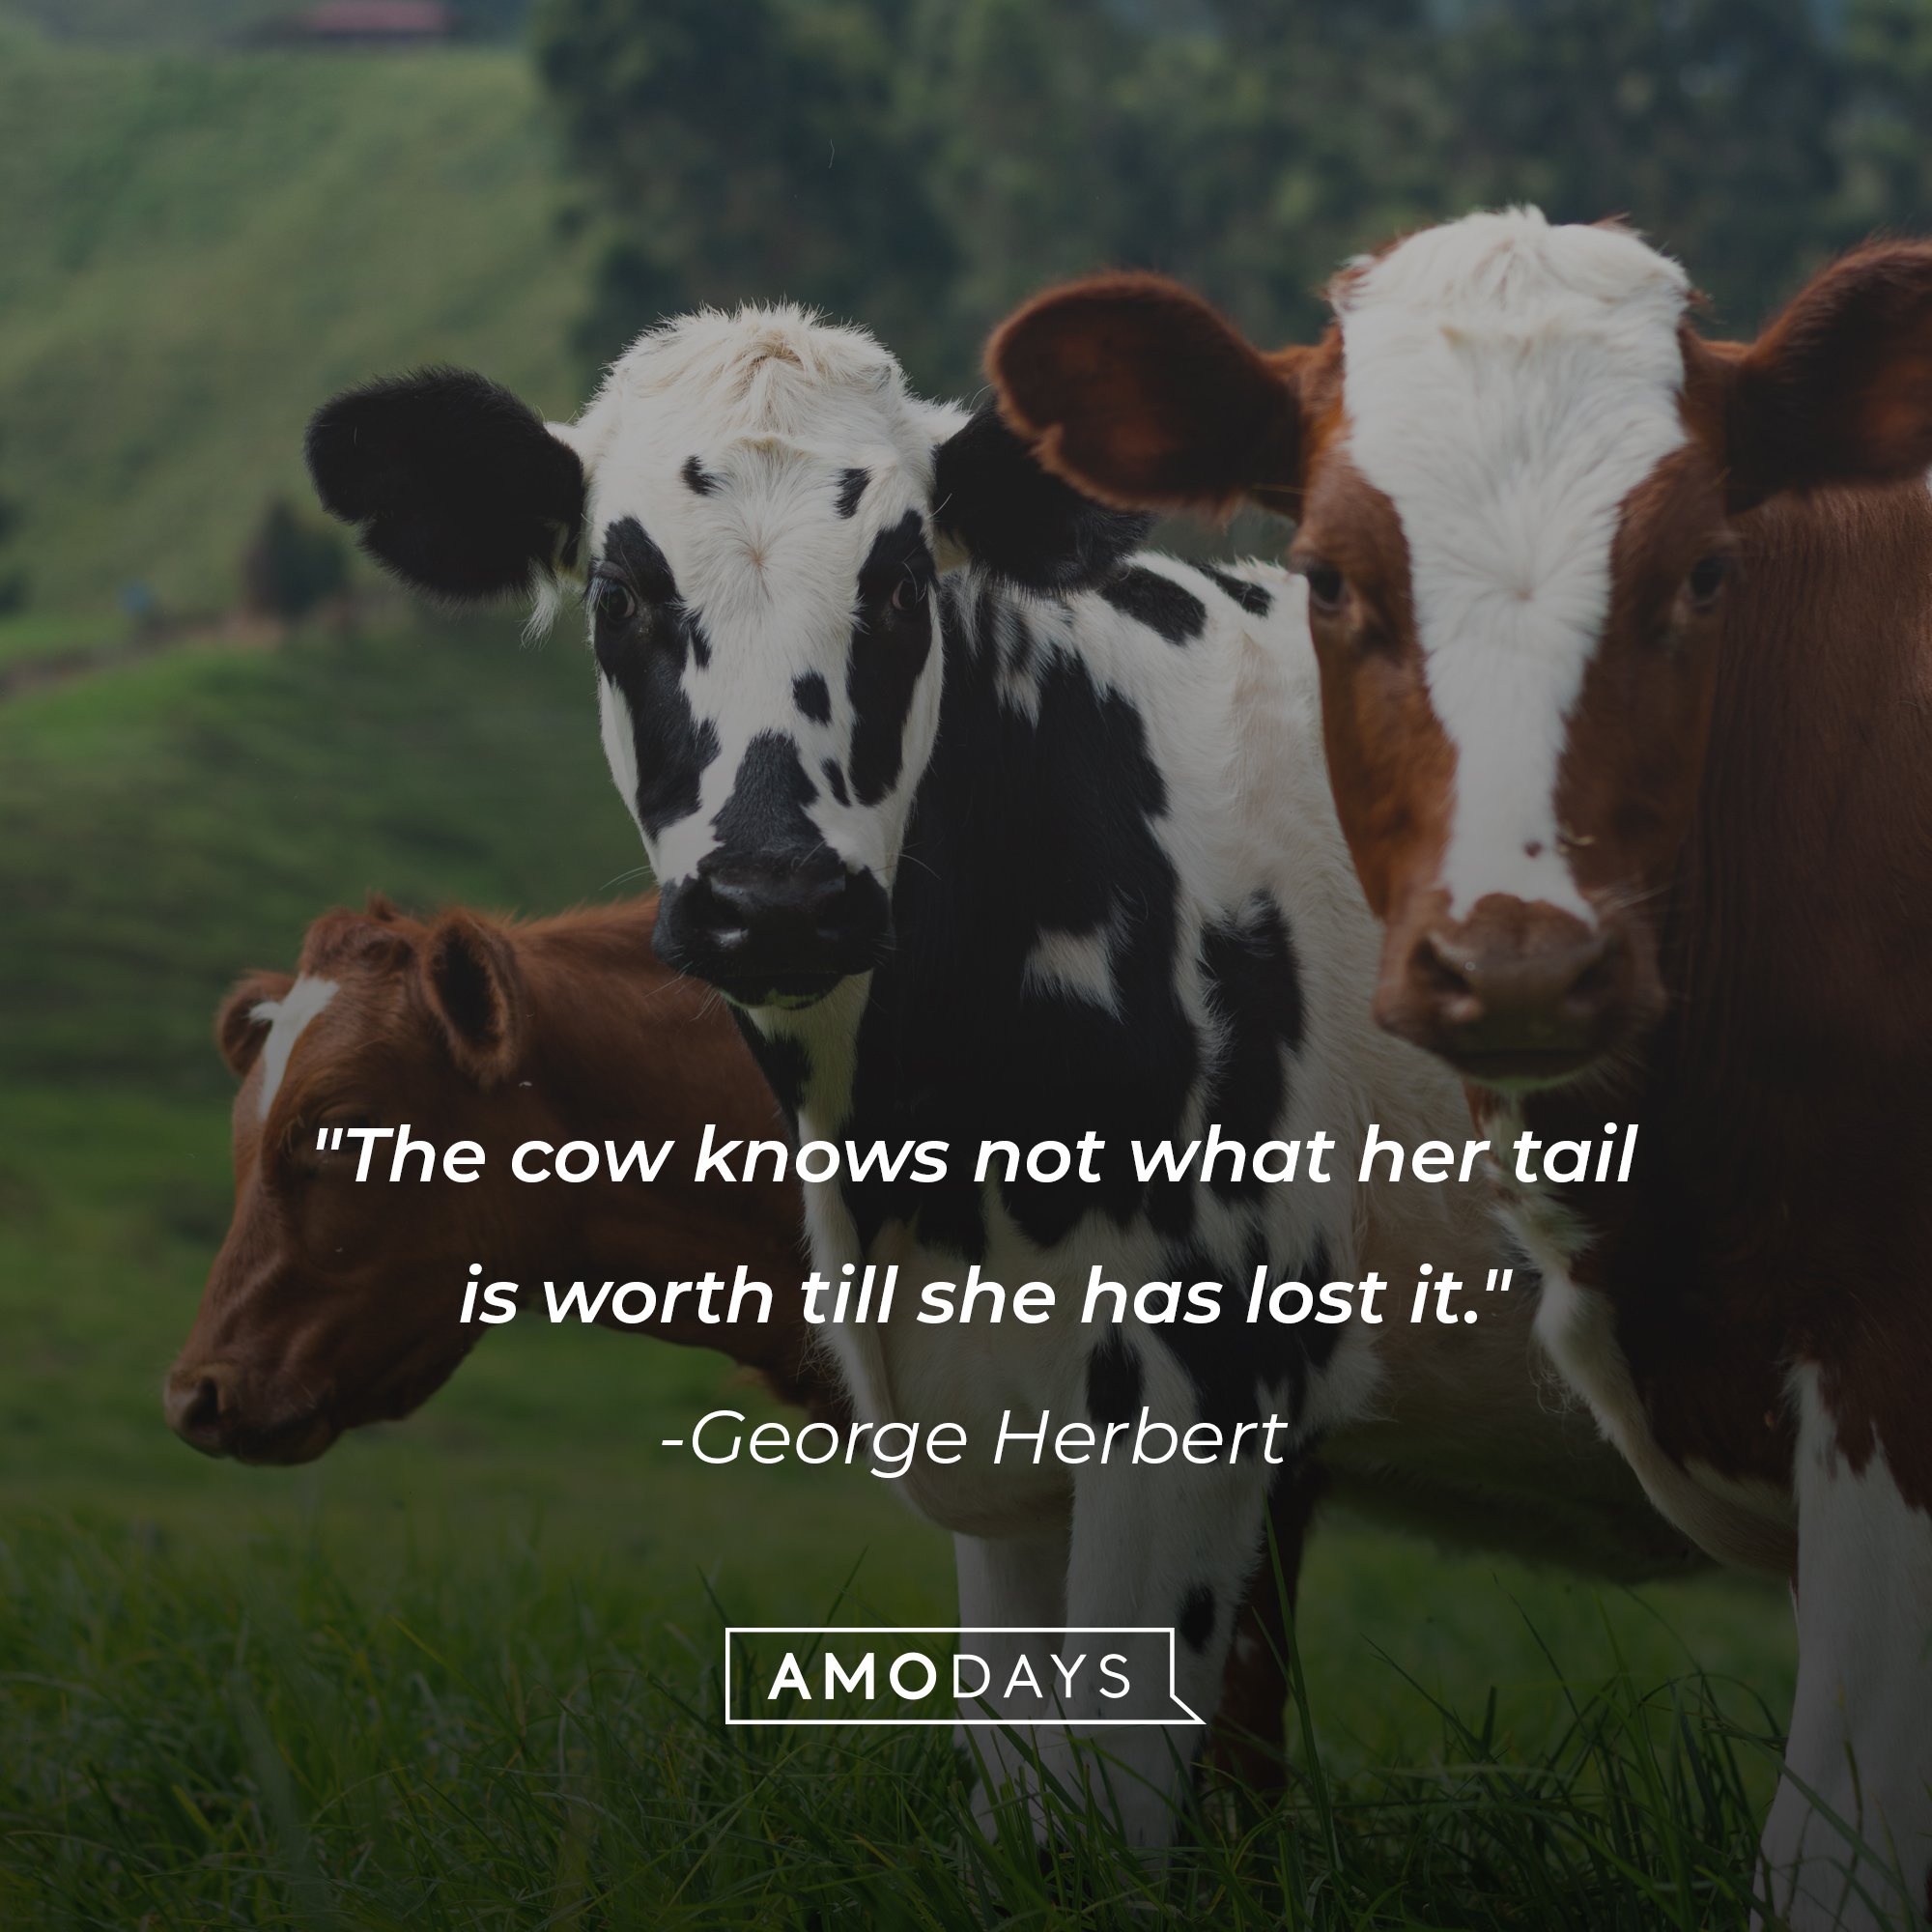 George Herbert’s quote: "The cow knows not what her tail is worth till she has lost it." | Image: AmoDays